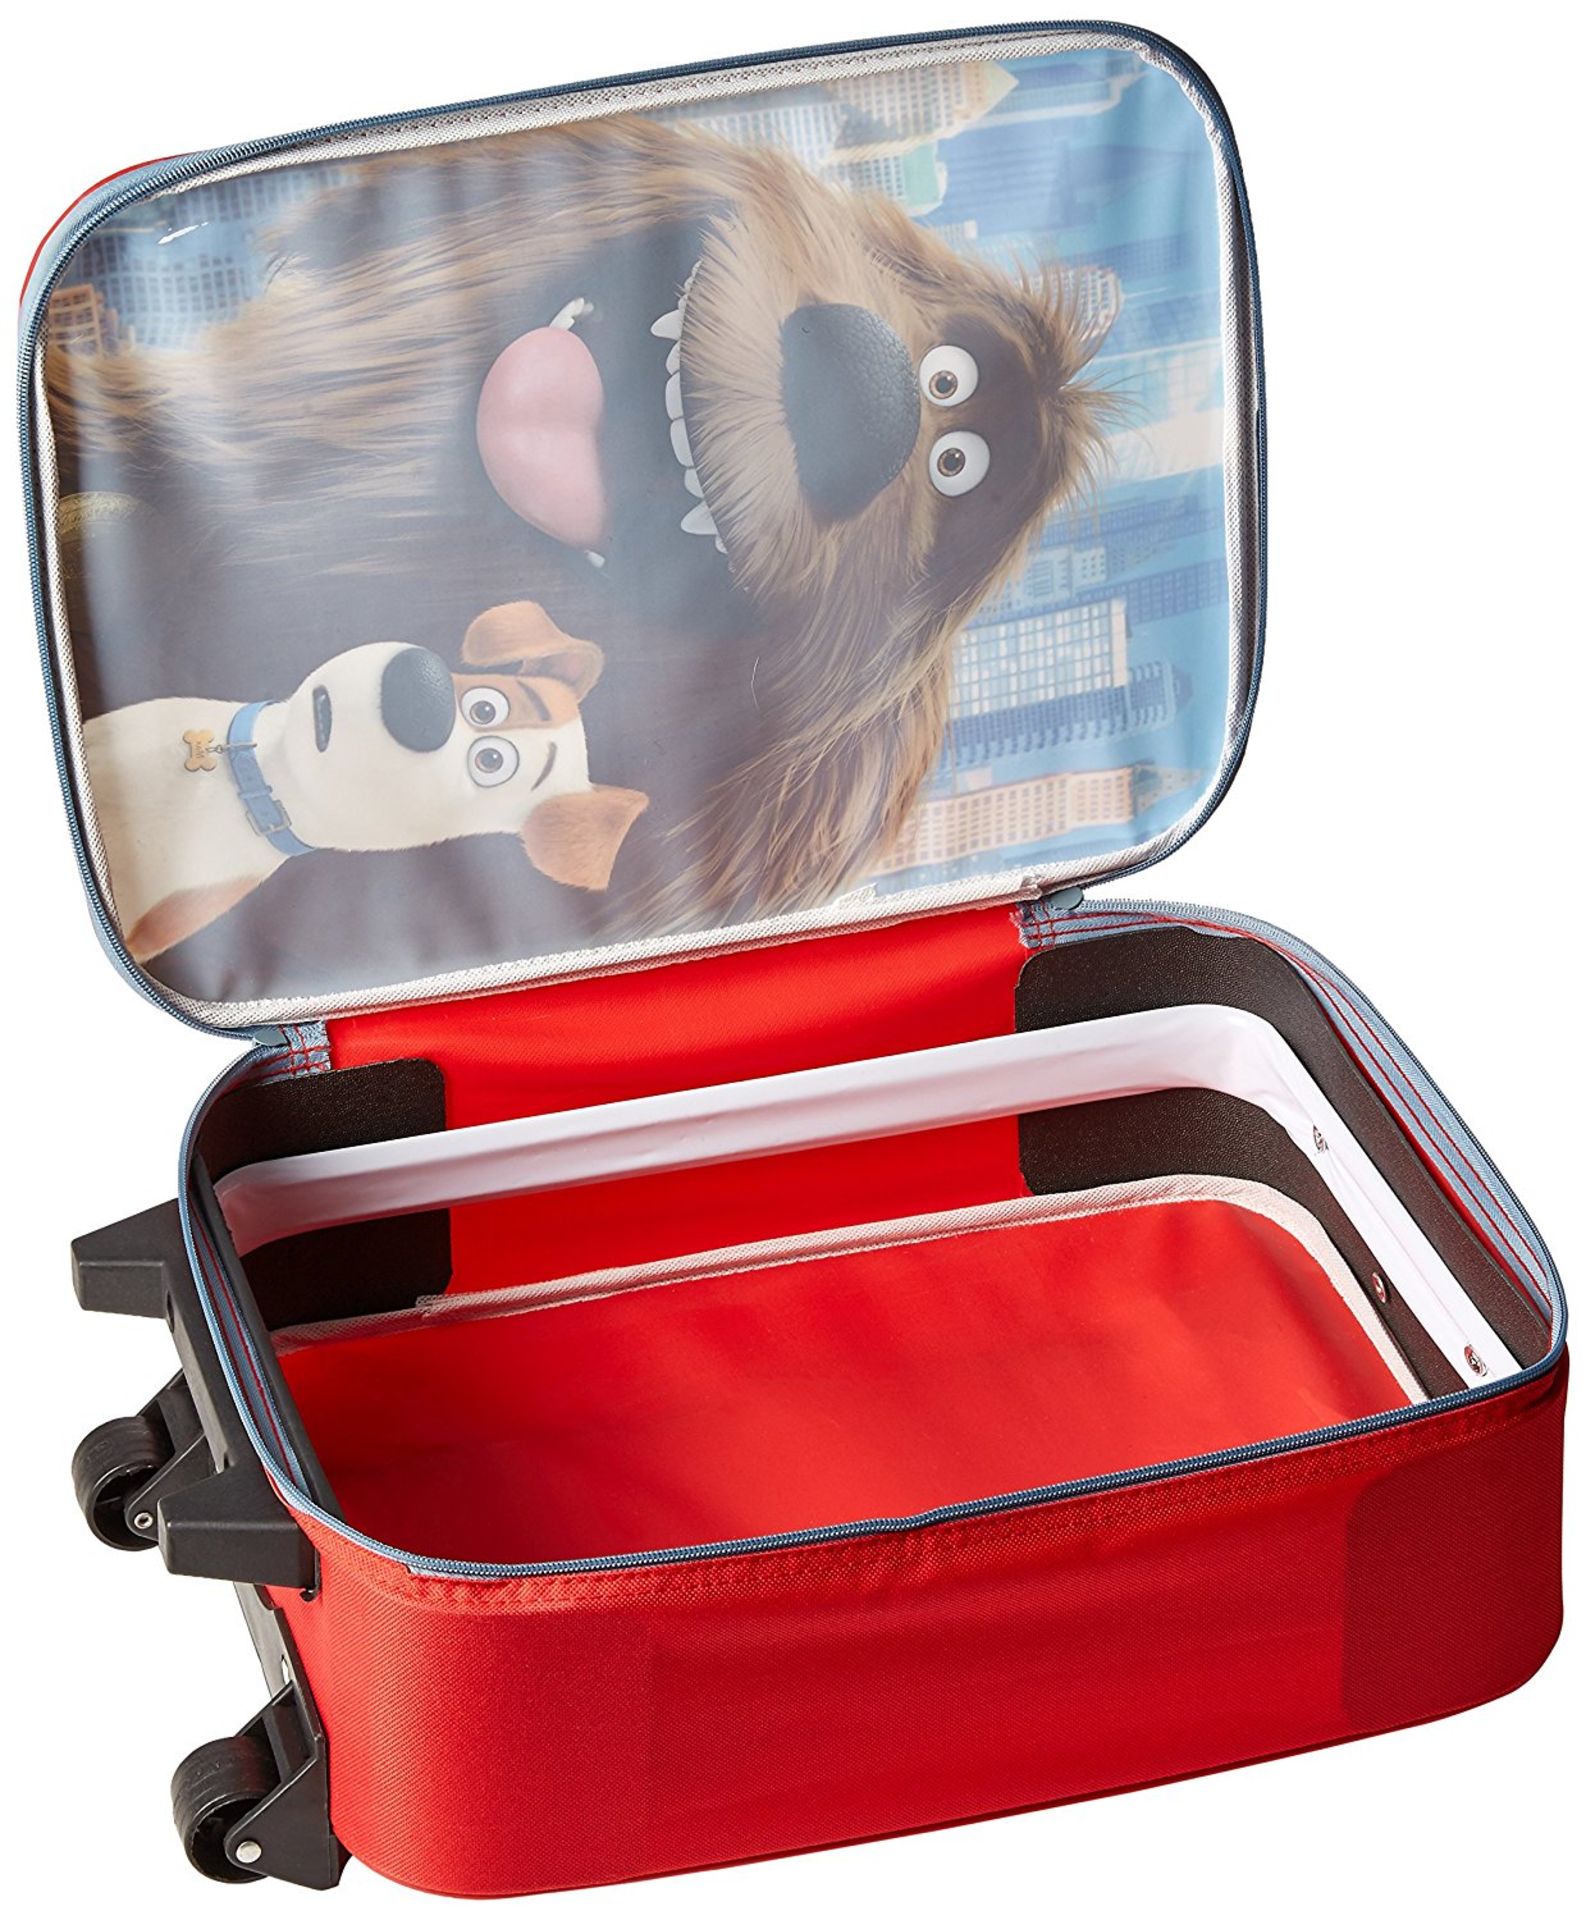 108 X Secret Life Of Pets 3Pce Travel Trolley Luggage Set [Brand New In Retail Packaging] - Image 5 of 6